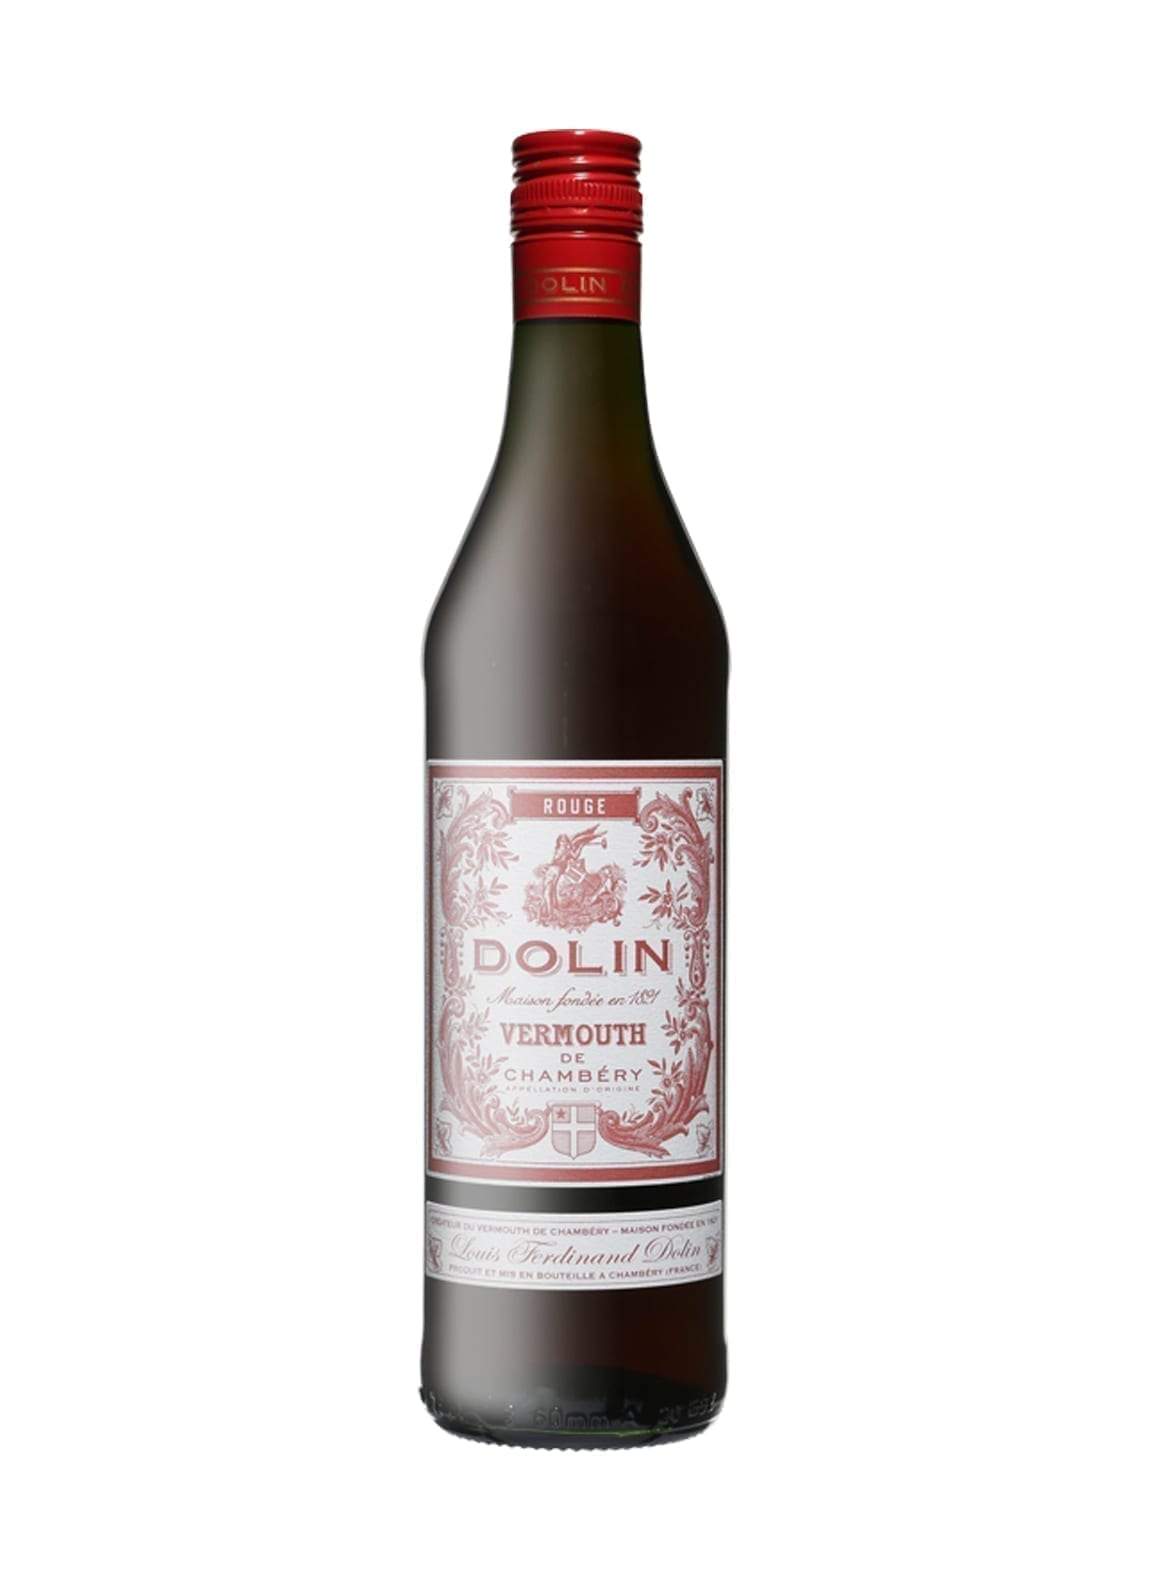 Dolin Vermouth Rouge (Red) 16% 750ml | Liquor & Spirits | Shop online at Spirits of France